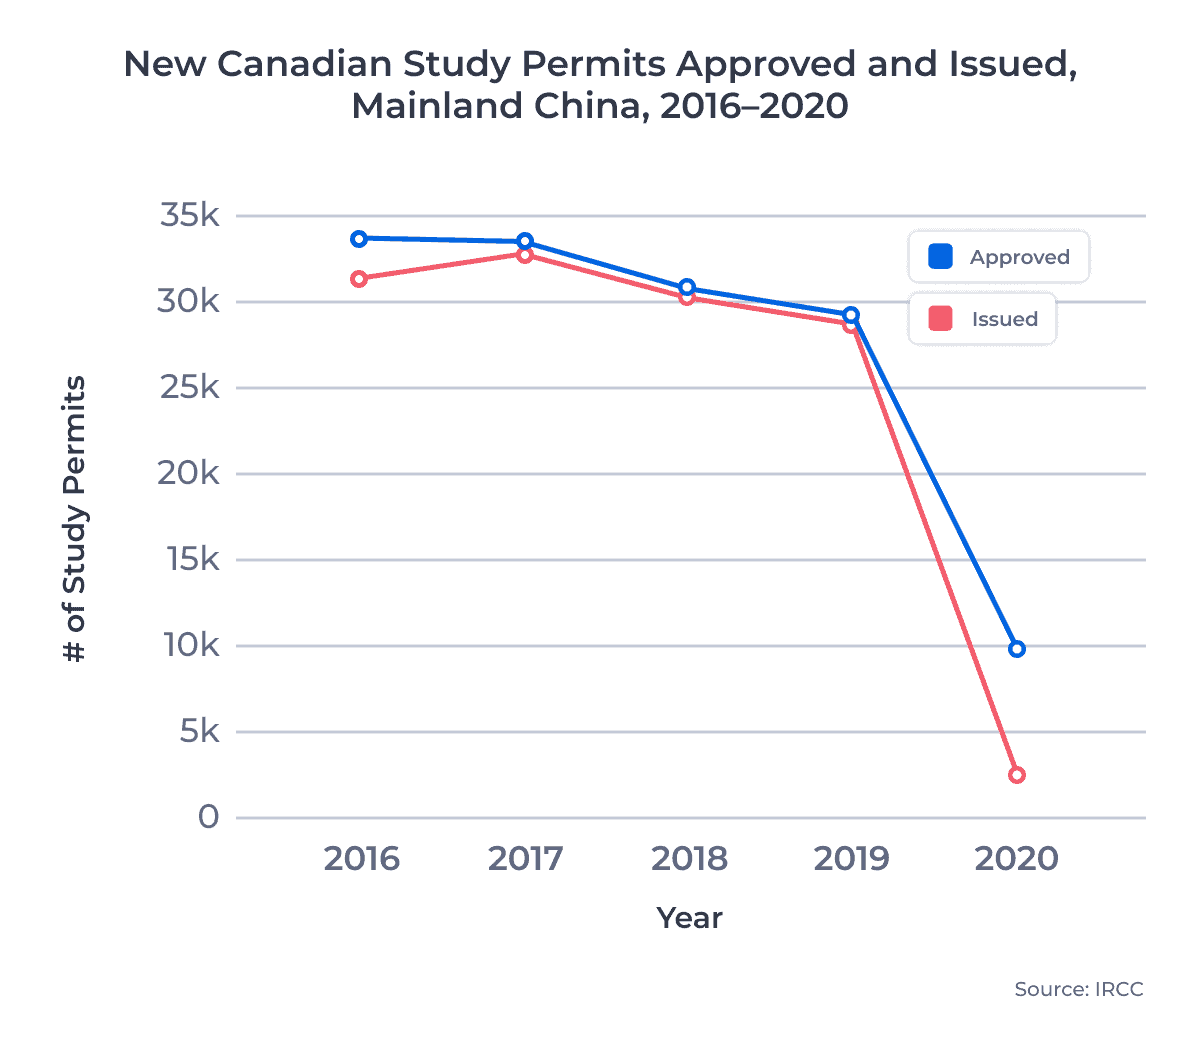 Line chart showing the number of new Canadian study permits approved for and issued to students from Mainland China between 2016 and 2020. Examined in detail below.